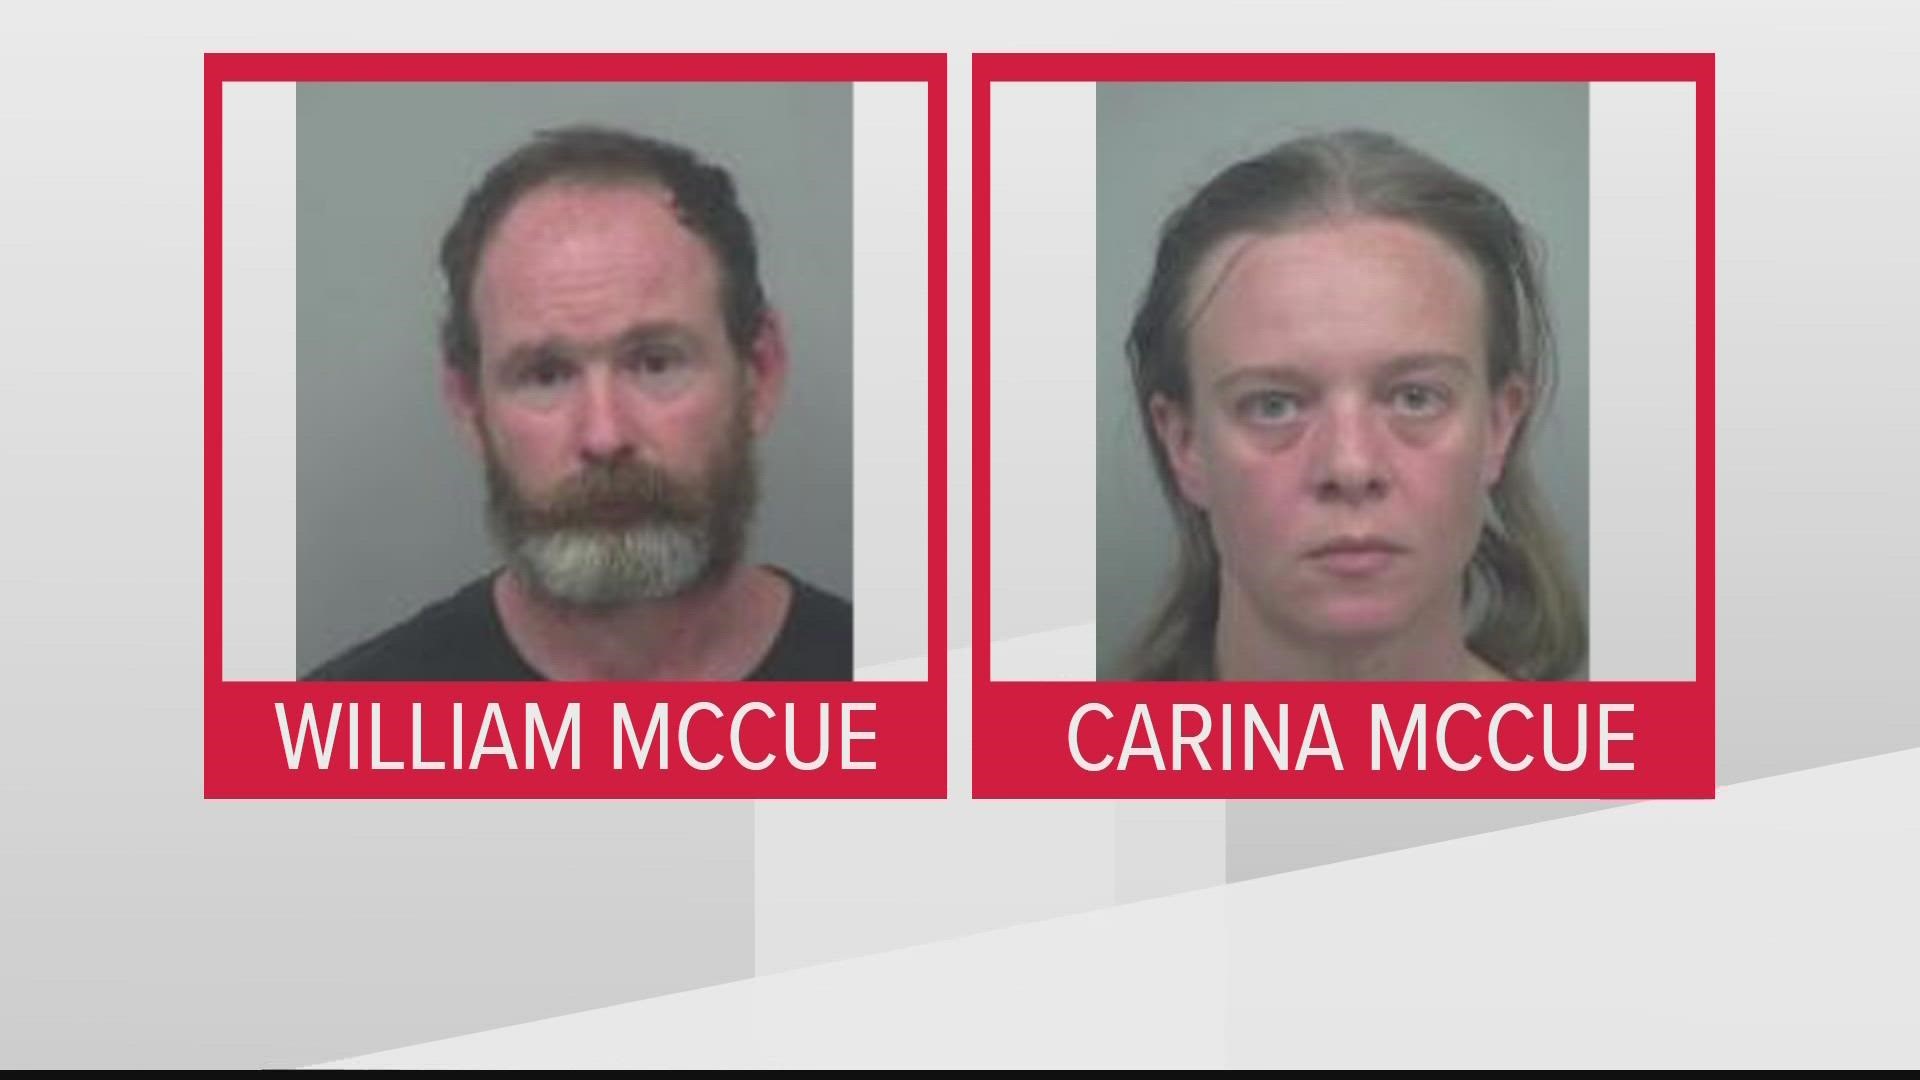 William and Carina McCue were indicted on felony murder charges. They were on the run for nearly two months after their 10-year-old died in a fire at their home.